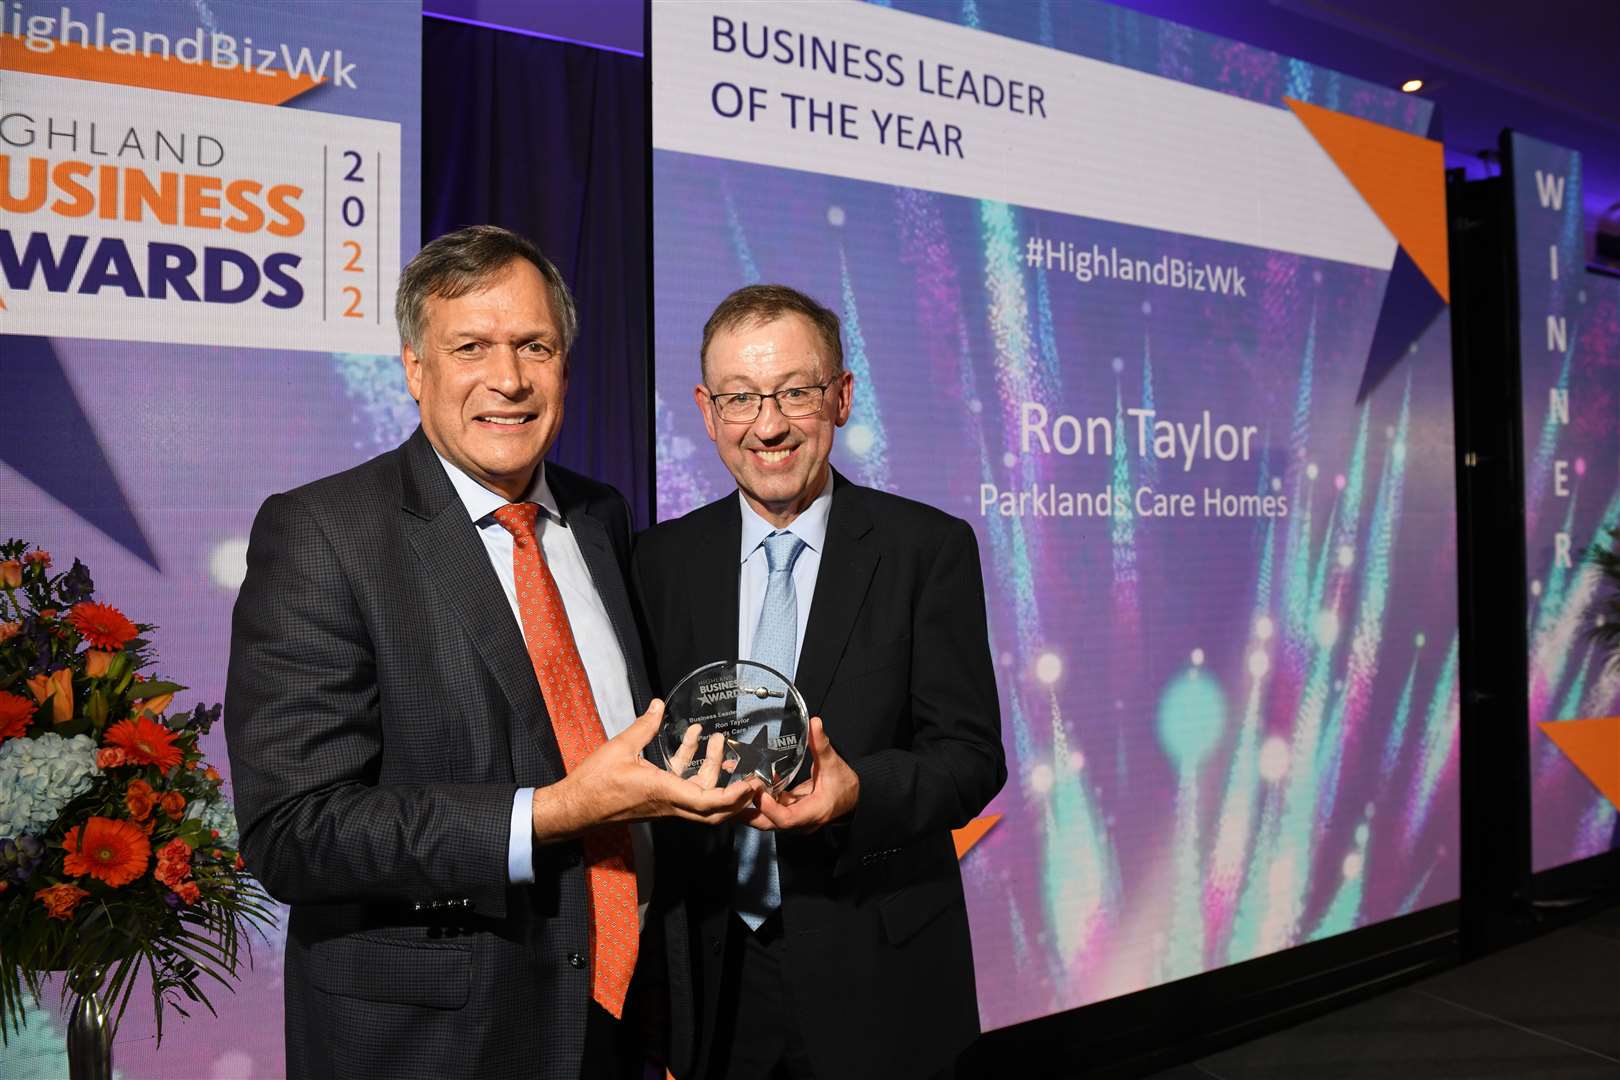 The business leader of the year was Ron Taylor, managing director of Parklands Care Homes – one of three awards for the organisation at last year’s Highland Business Awards. Picture: James Mackenzie